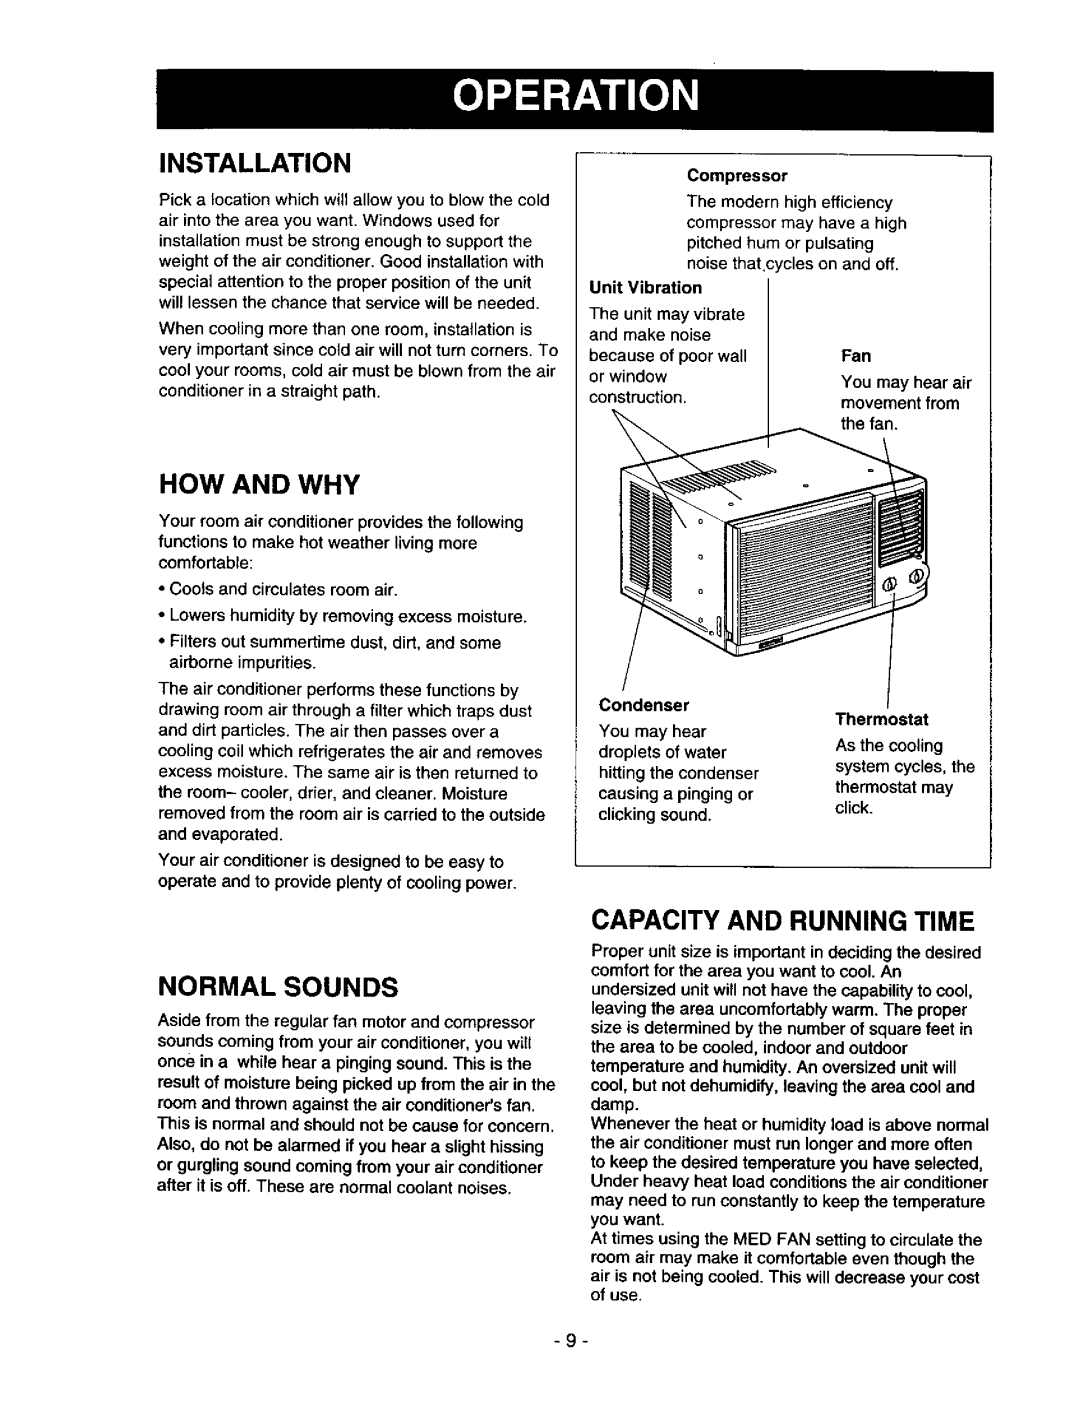 Kenmore 78122 owner manual How And Why, Capacity And Running Time, Installation, Normal Sounds 